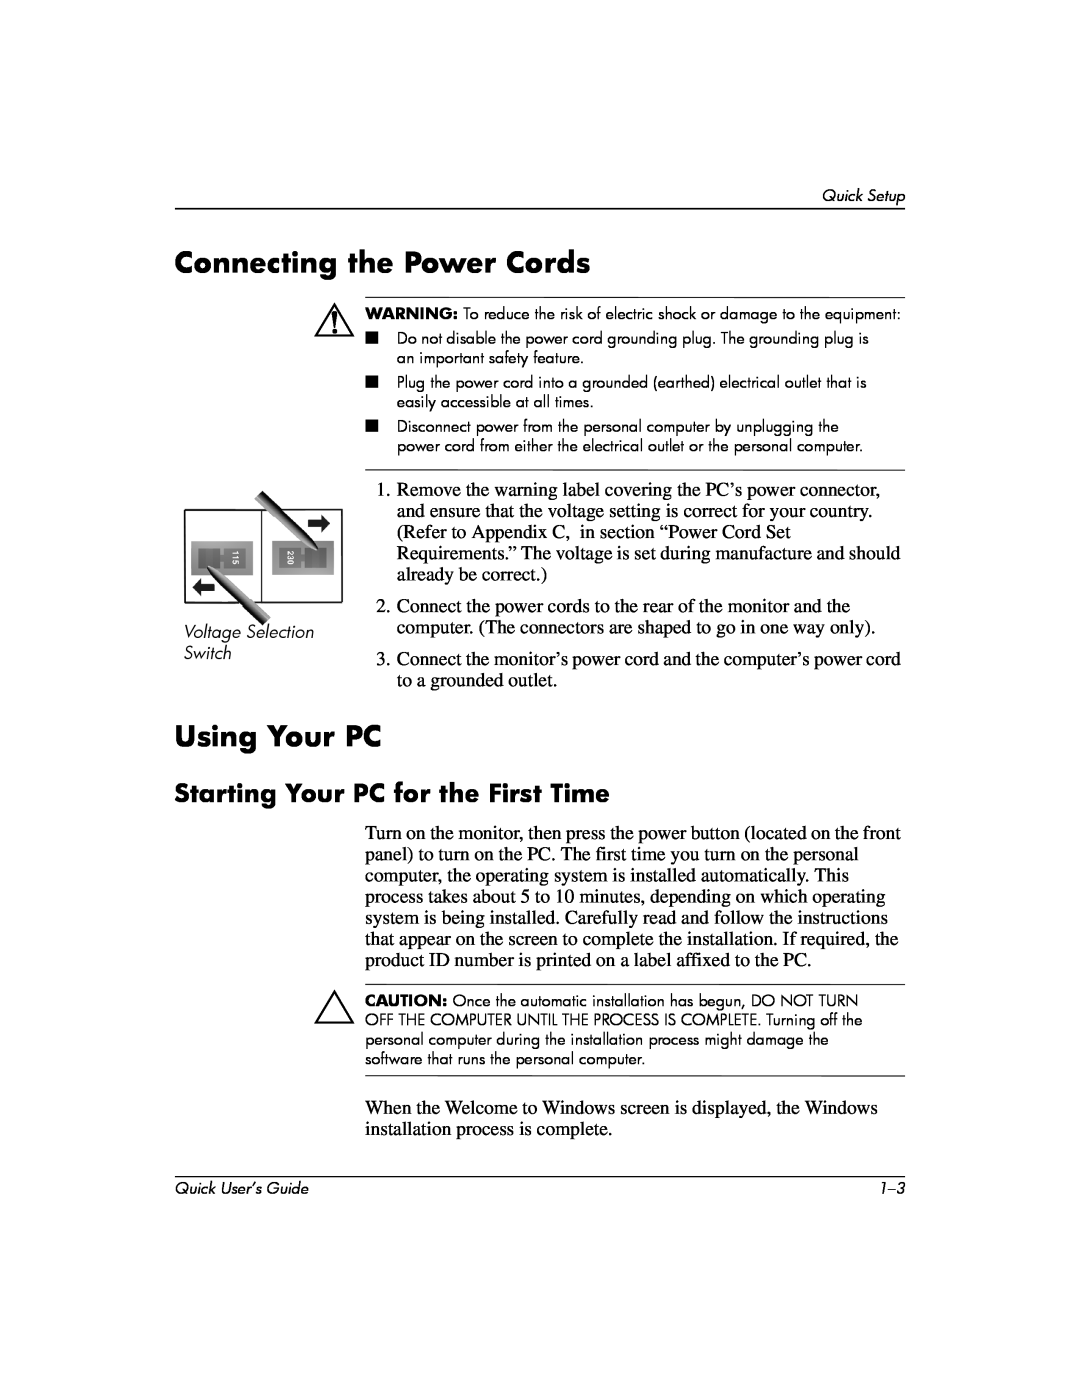 Compaq D510 e-pc manual Connecting the Power Cords, Using Your PC, Starting Your PC for the First Time 